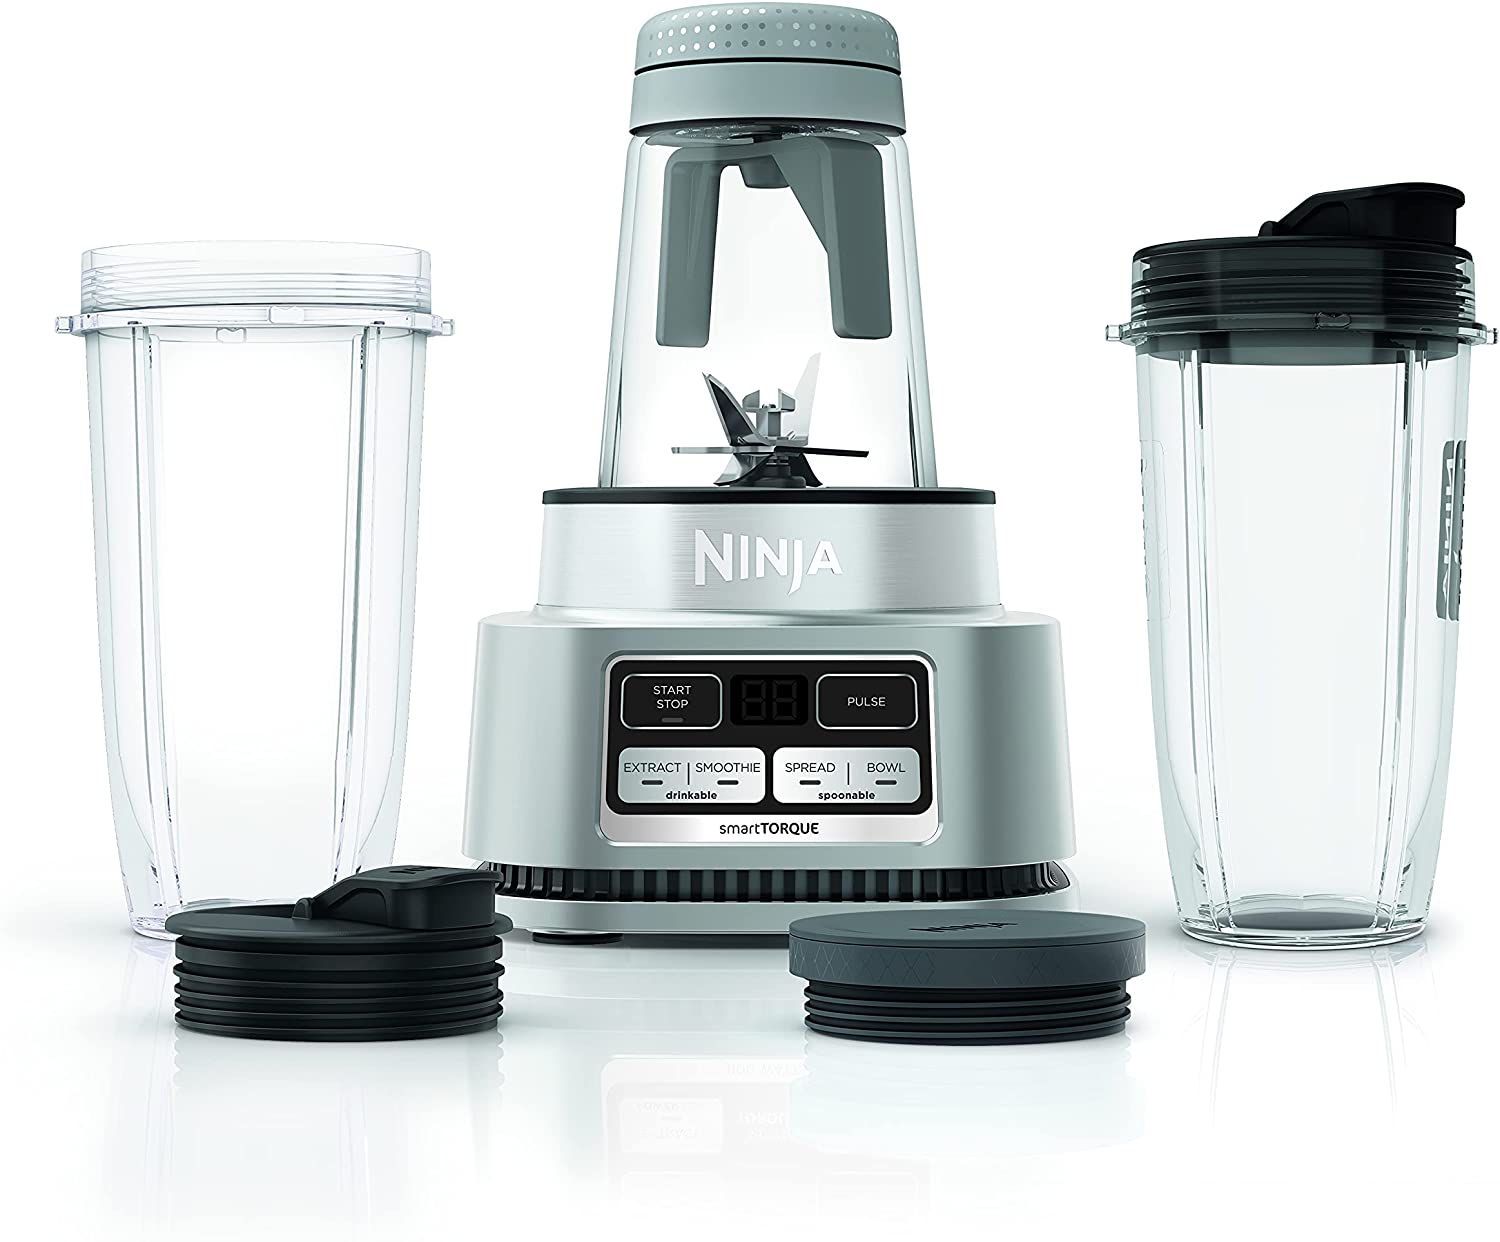 Ninja 1200WP Foodi Smoothie Bowl Maker and Nutrient Extractor Blender (Silver) $68 + Free Shipping